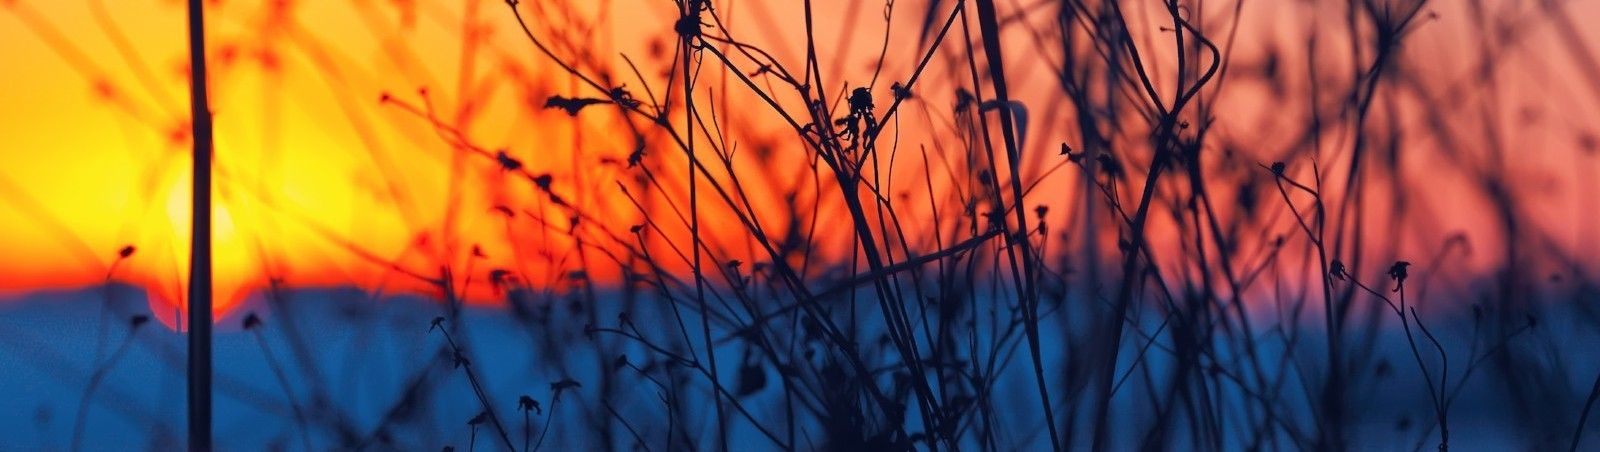 A bare shrub in the foreground with a sunset in the background.